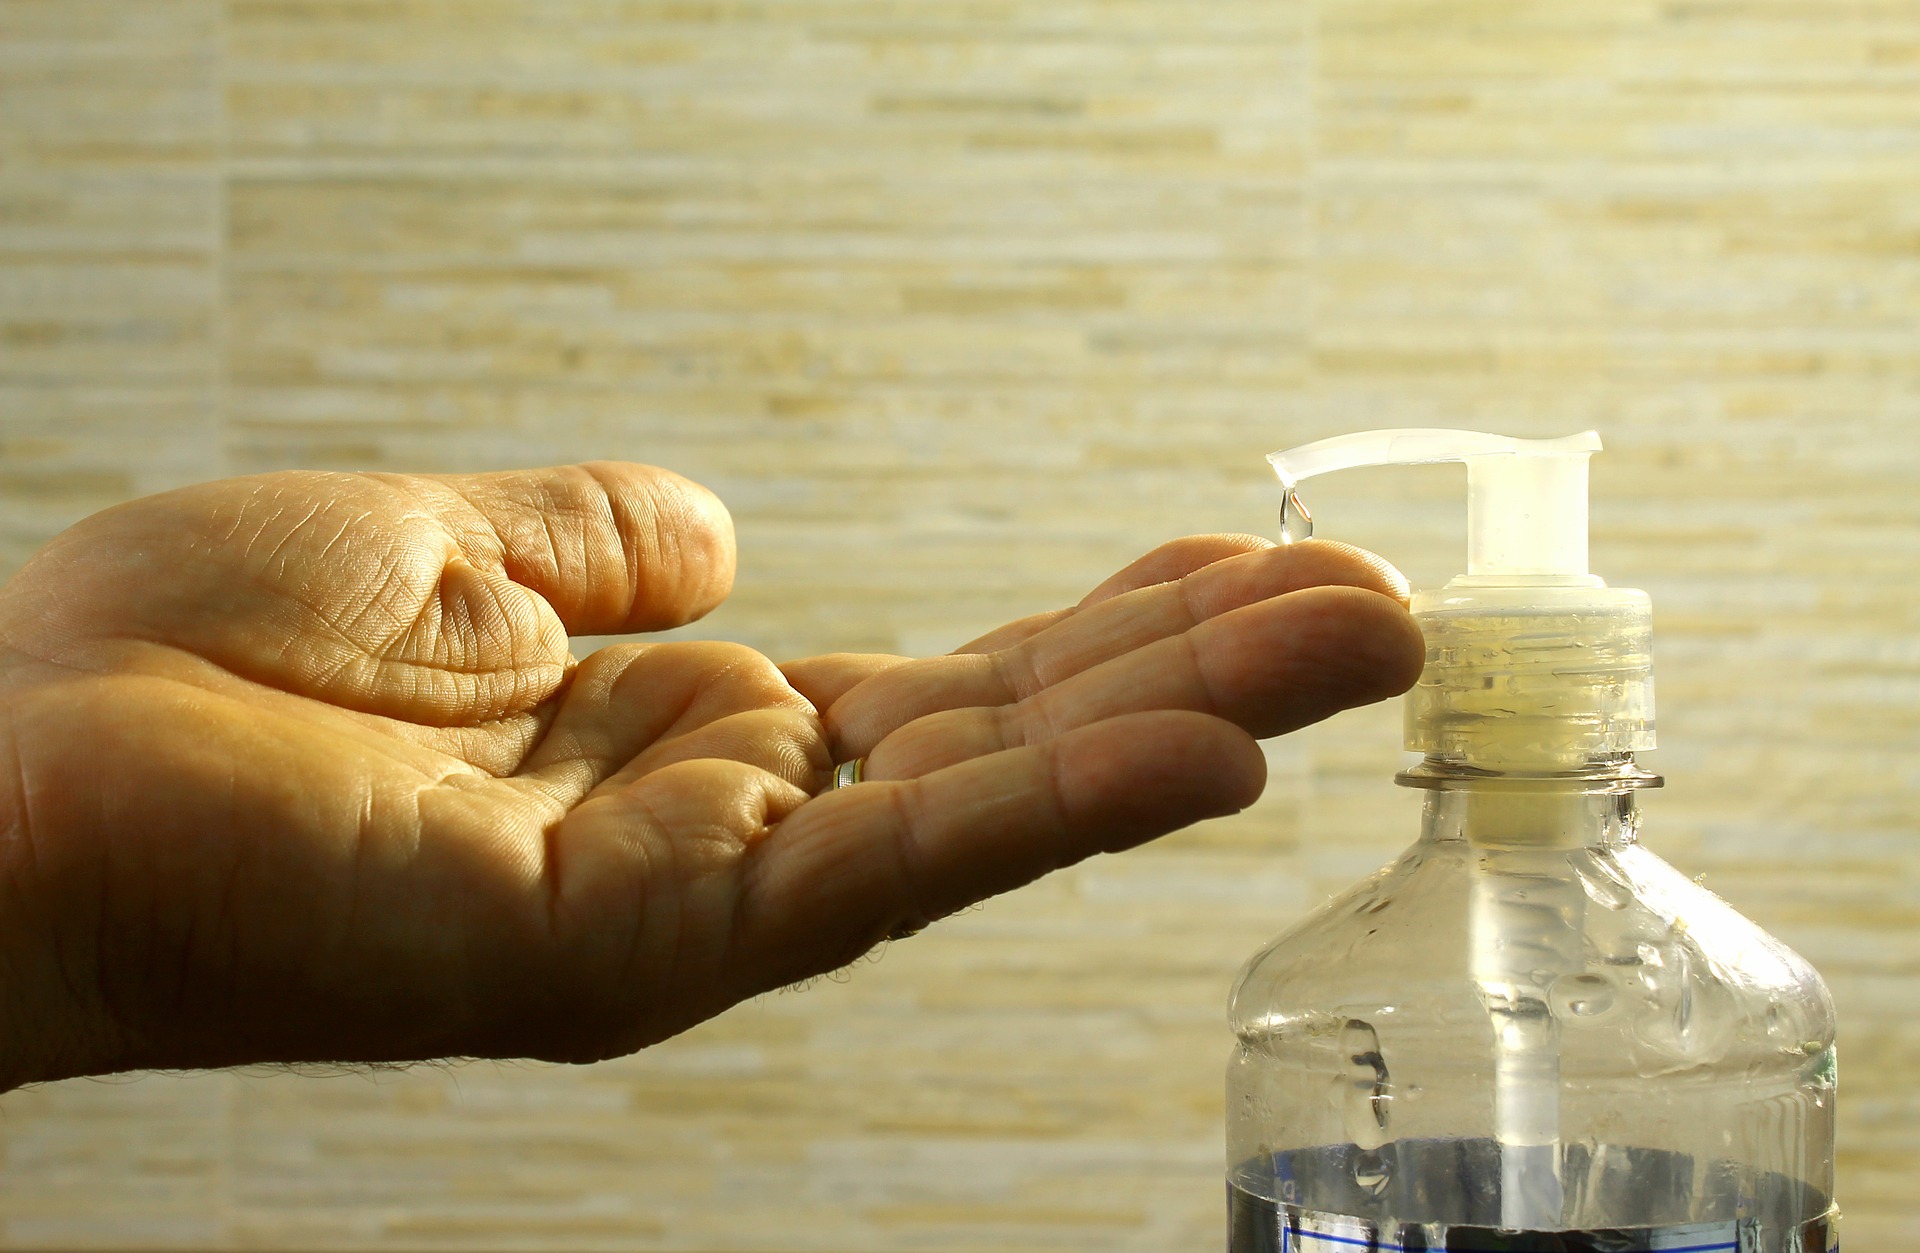 Hand sanitizer is an underrated survival supply that should be in your bag.